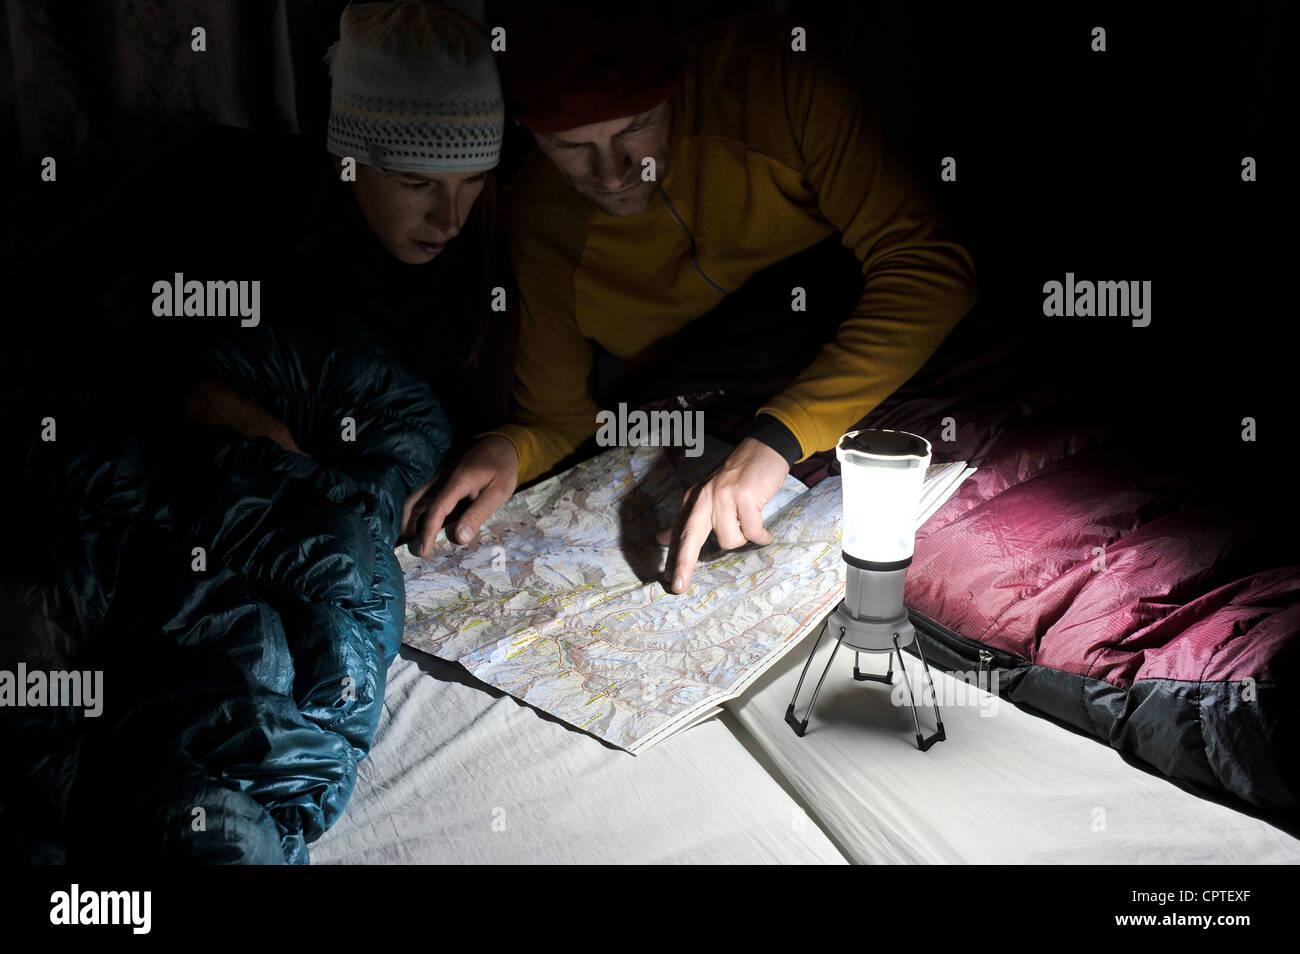 Couple in sleeping bags, looking at trail map, Yak Kharka, Nepal Stock Photo